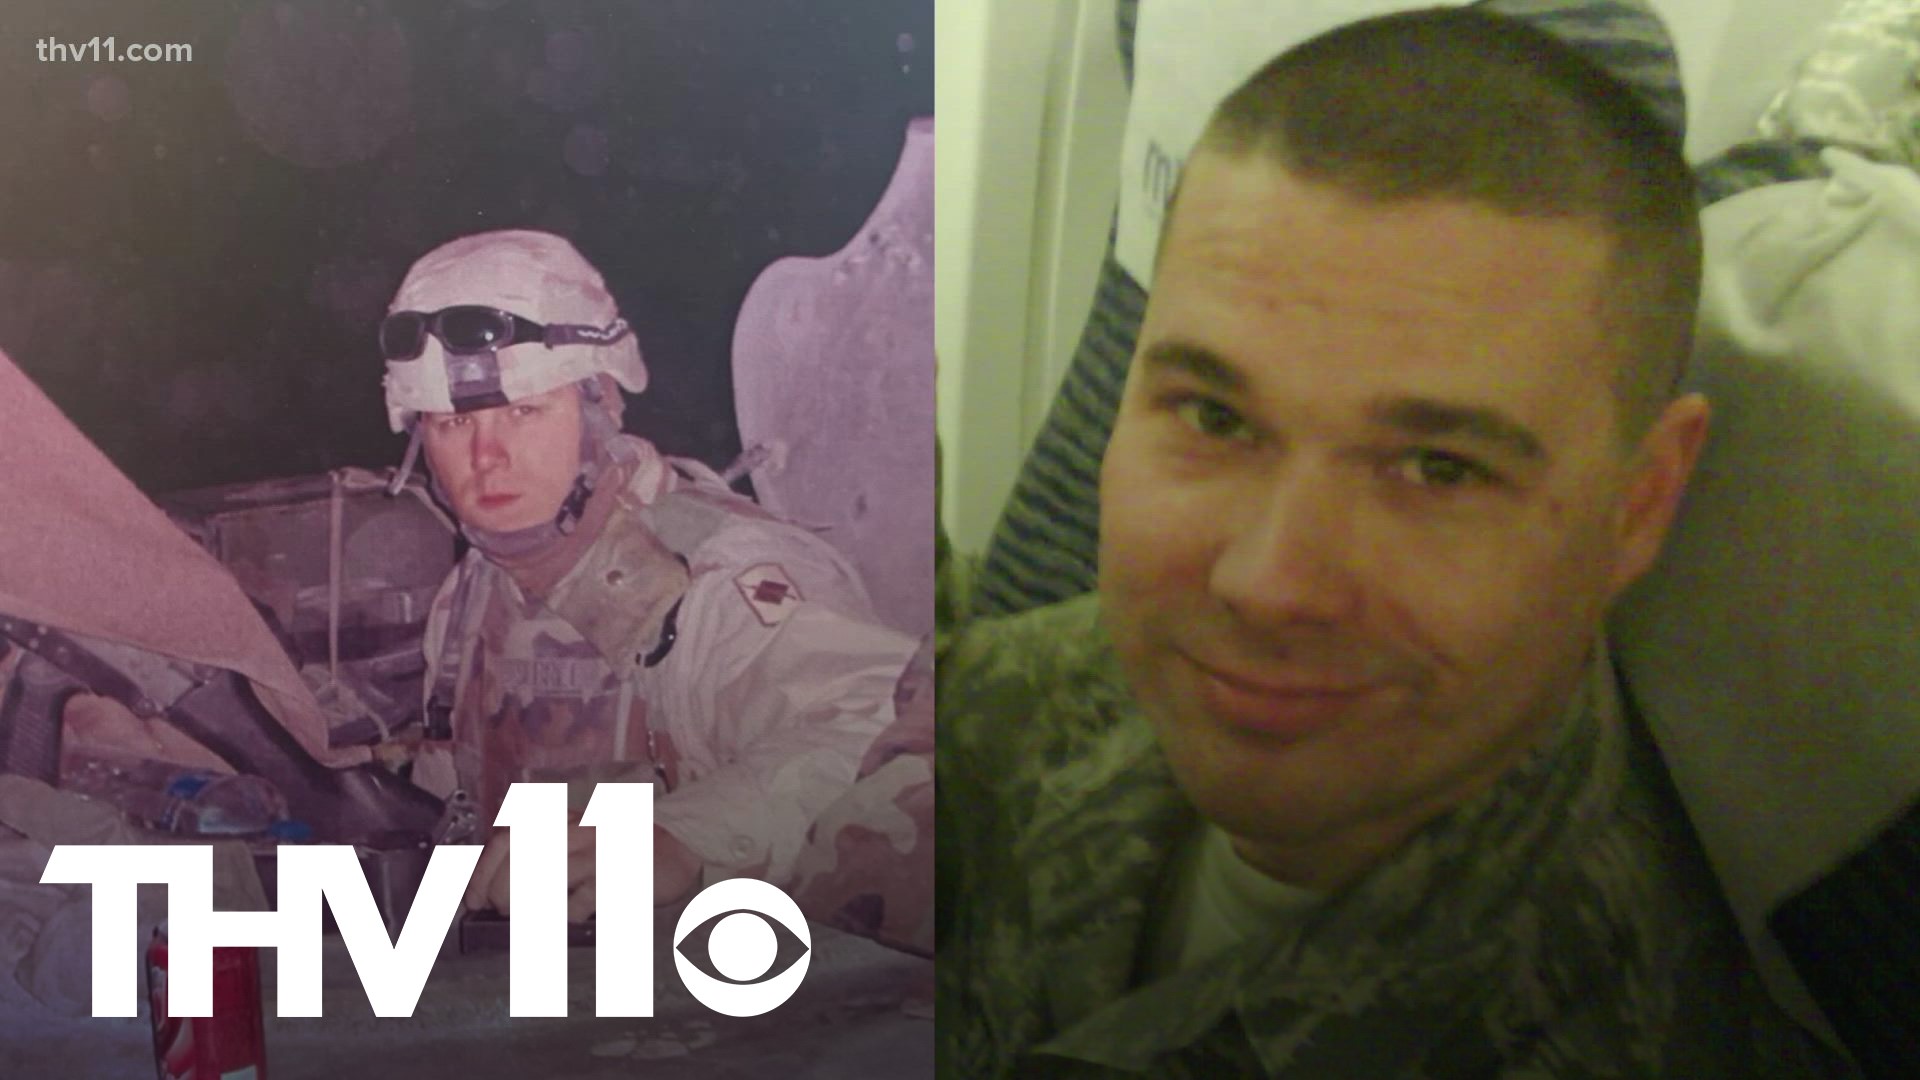 Two men in Arkansas were so impacted by the tragedy of the September 11 attacks, they enlisted in the military right away.